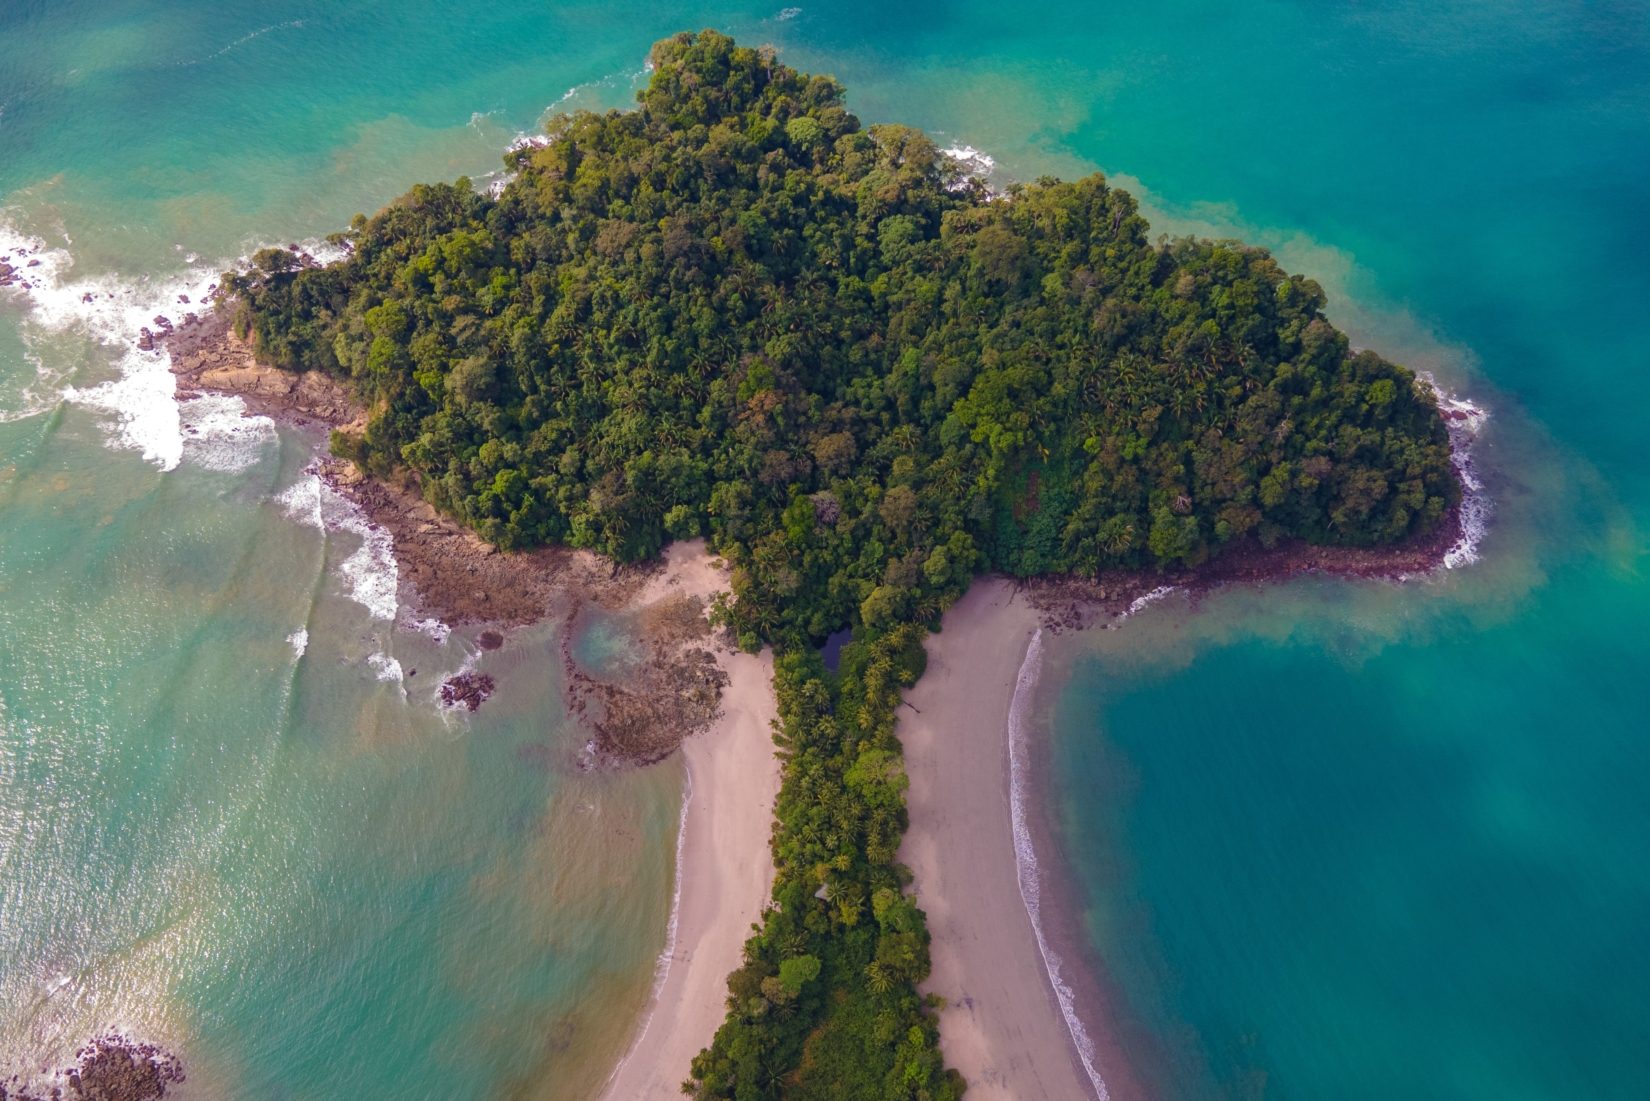 Mushroom-shaped peninsula filled with dense greenery with beaches outlining the stalk and turquoise waters surrounding the cutout